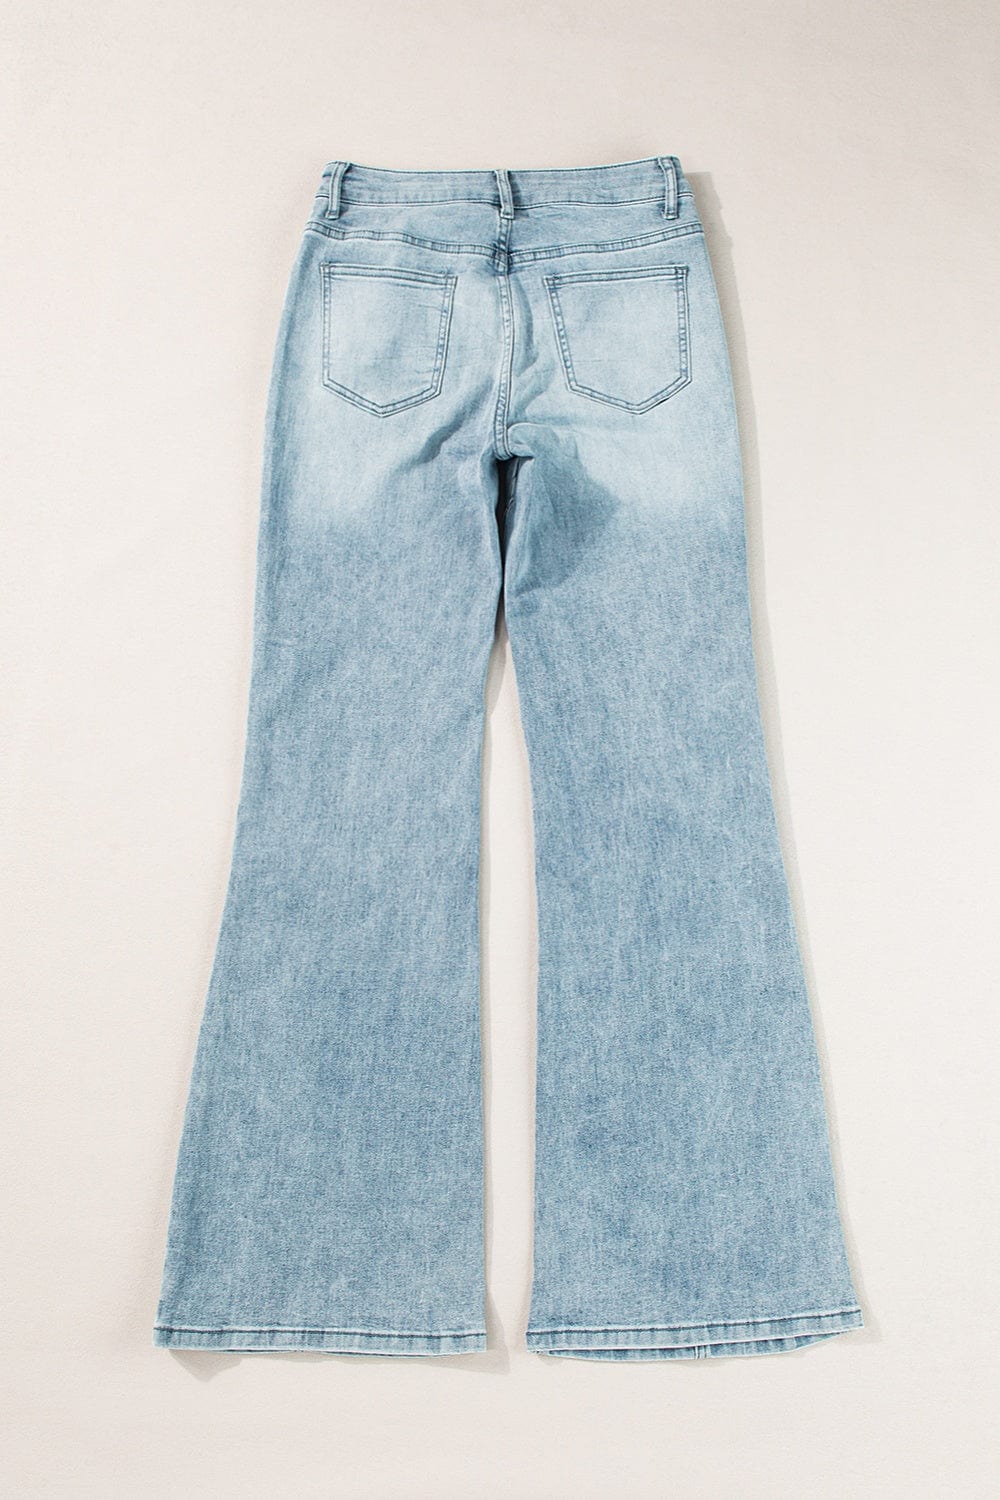 The802Gypsy Bottoms/Jeans GYPSY-High Waist Bootcut Jeans with Pockets